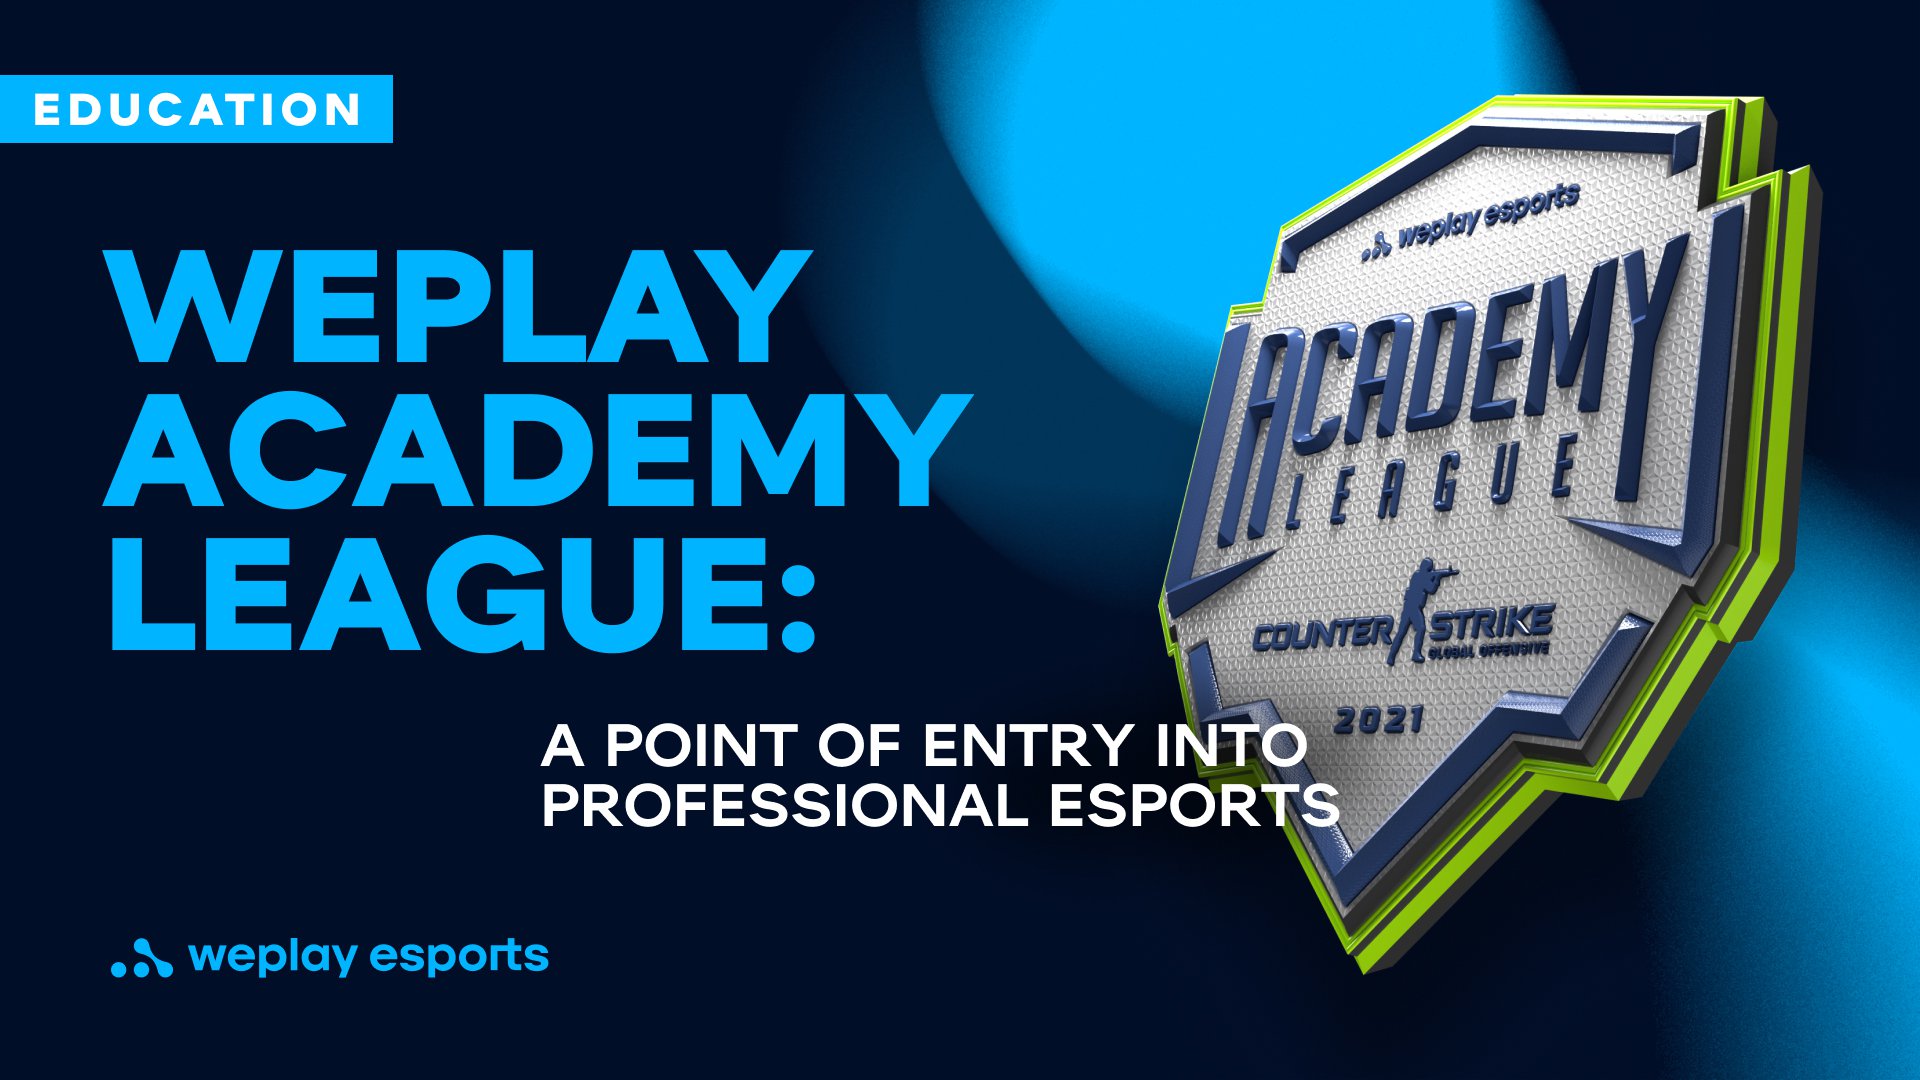 WePlay Academy League: a point of entry into professional esports. Credit: WePlay Holding